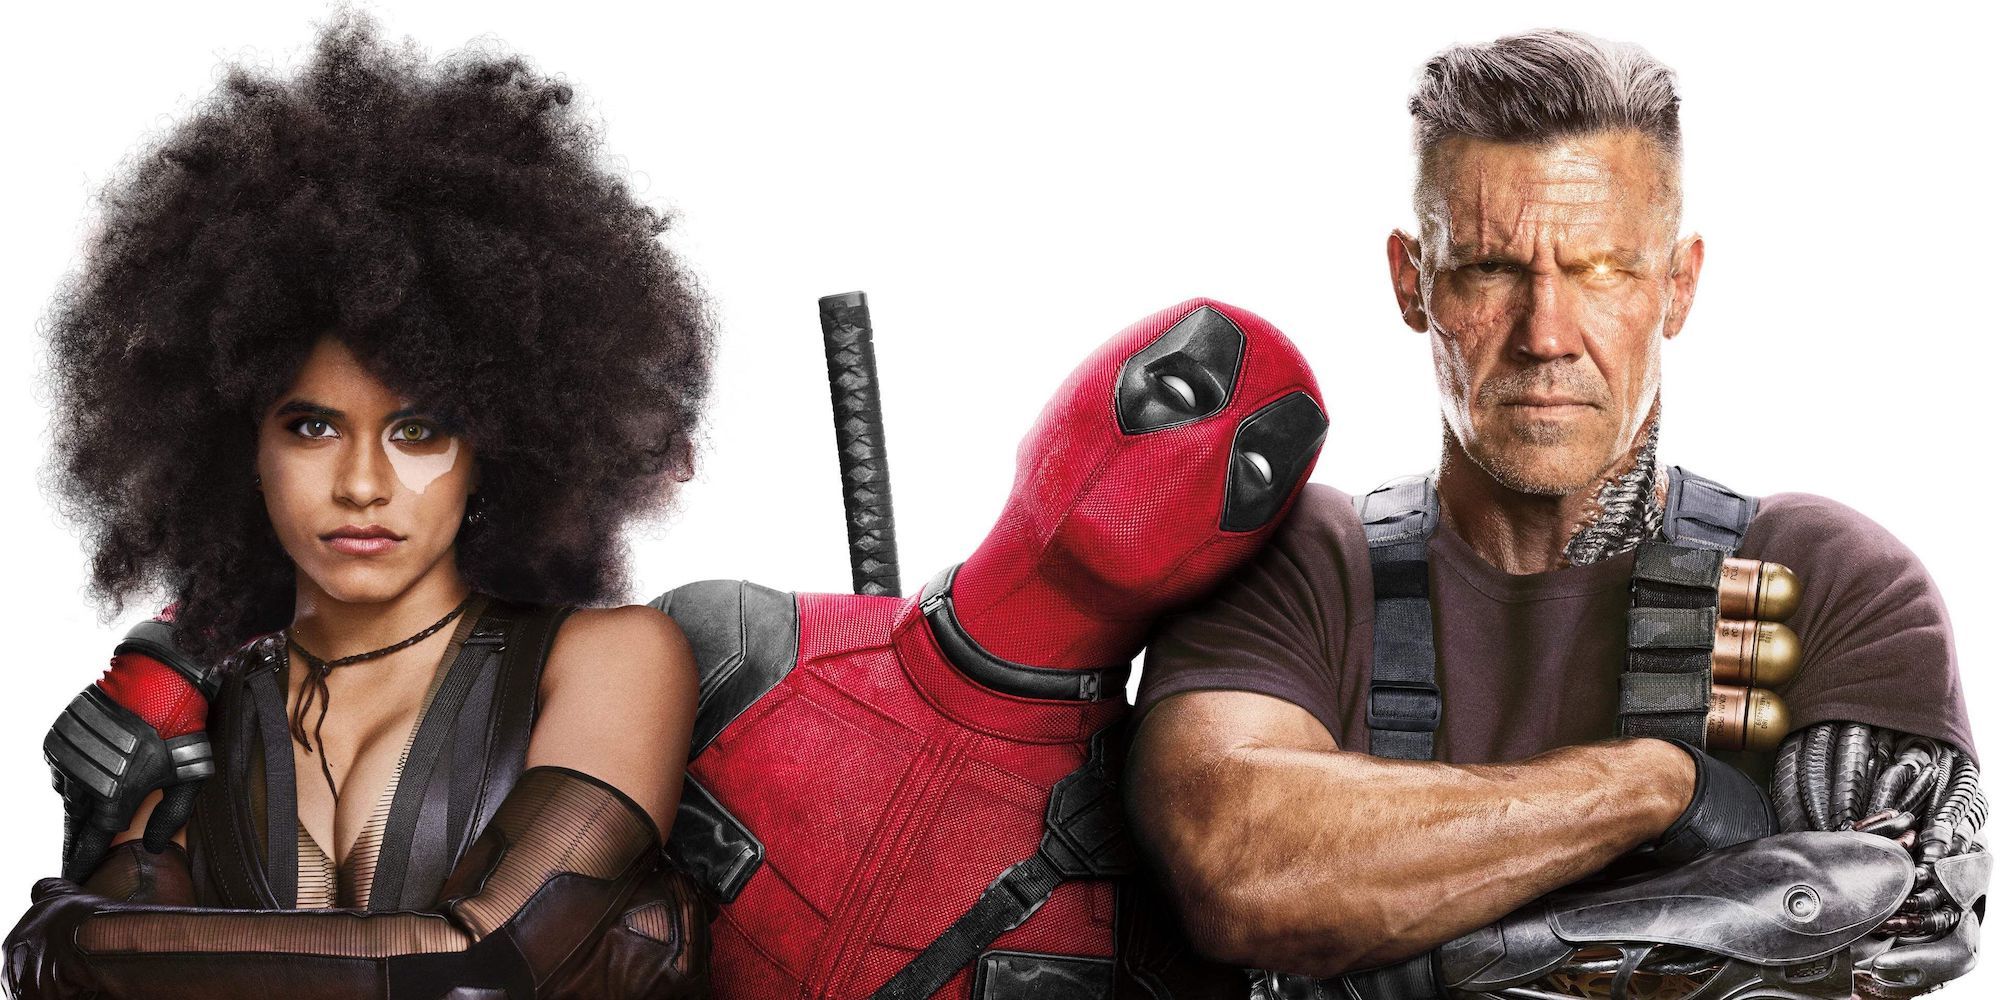 Deadpool posing with Domino and Cable in Deadpool 2